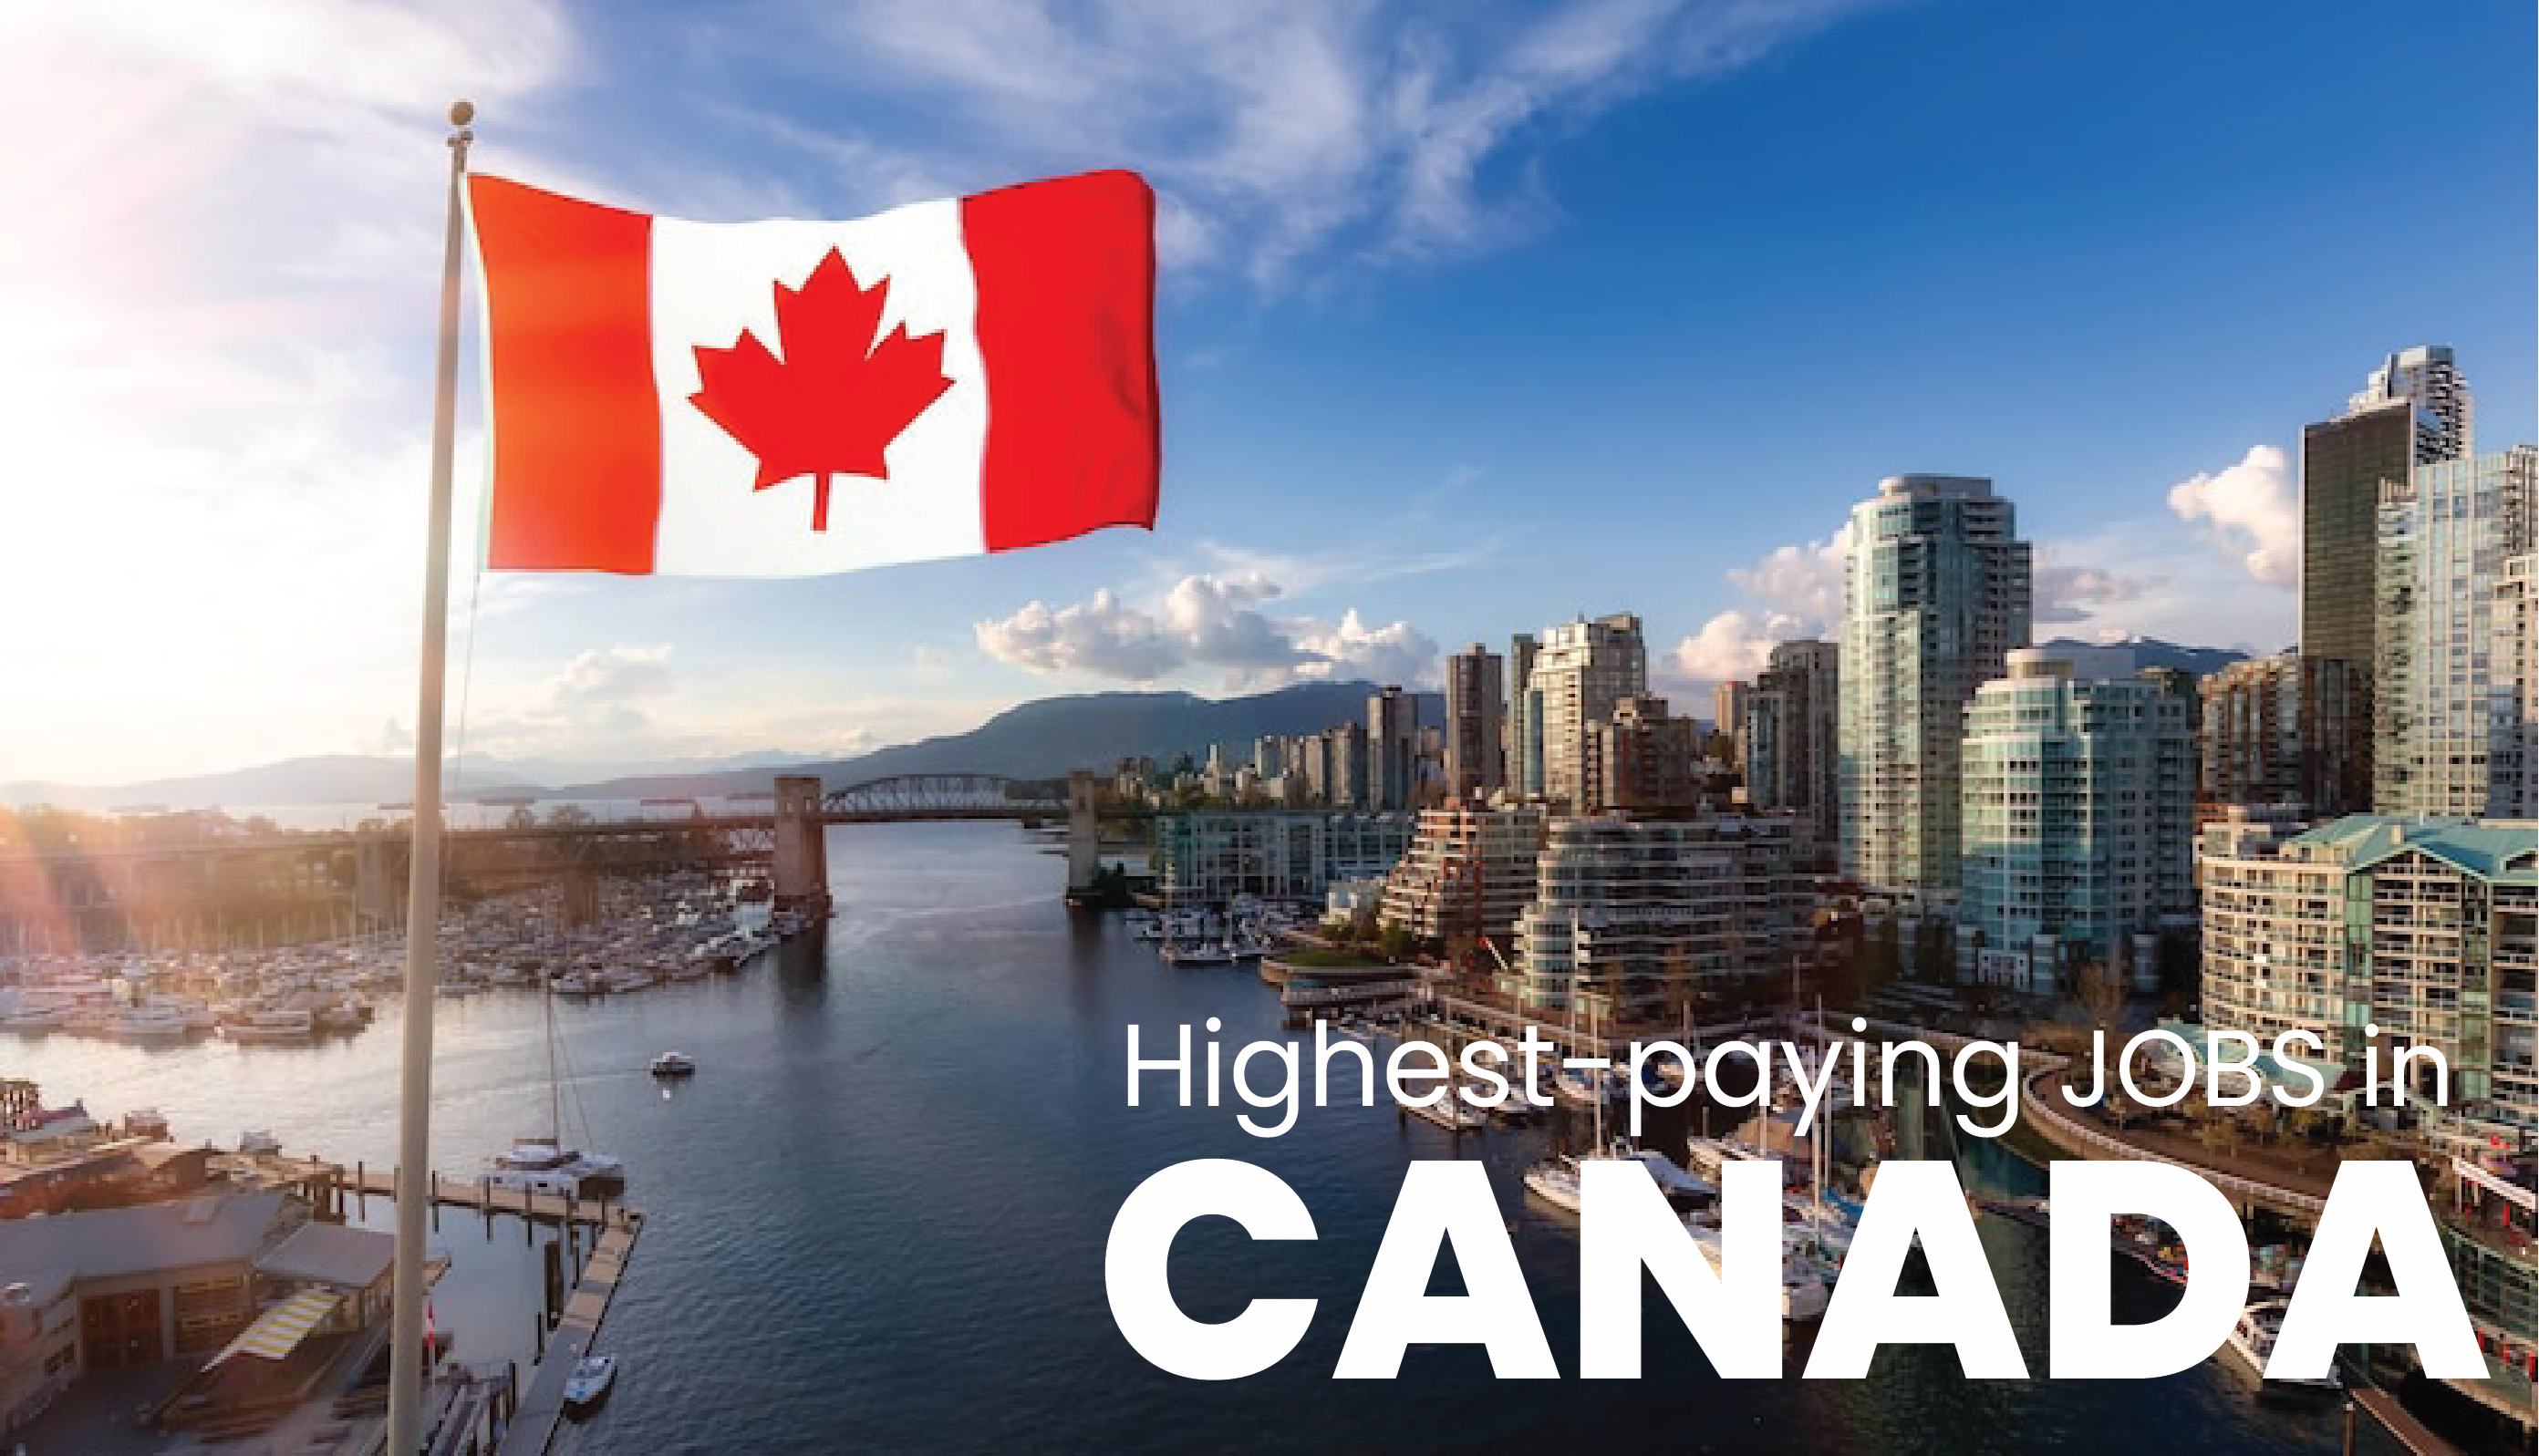 The Highest-paying jobs in Canada.